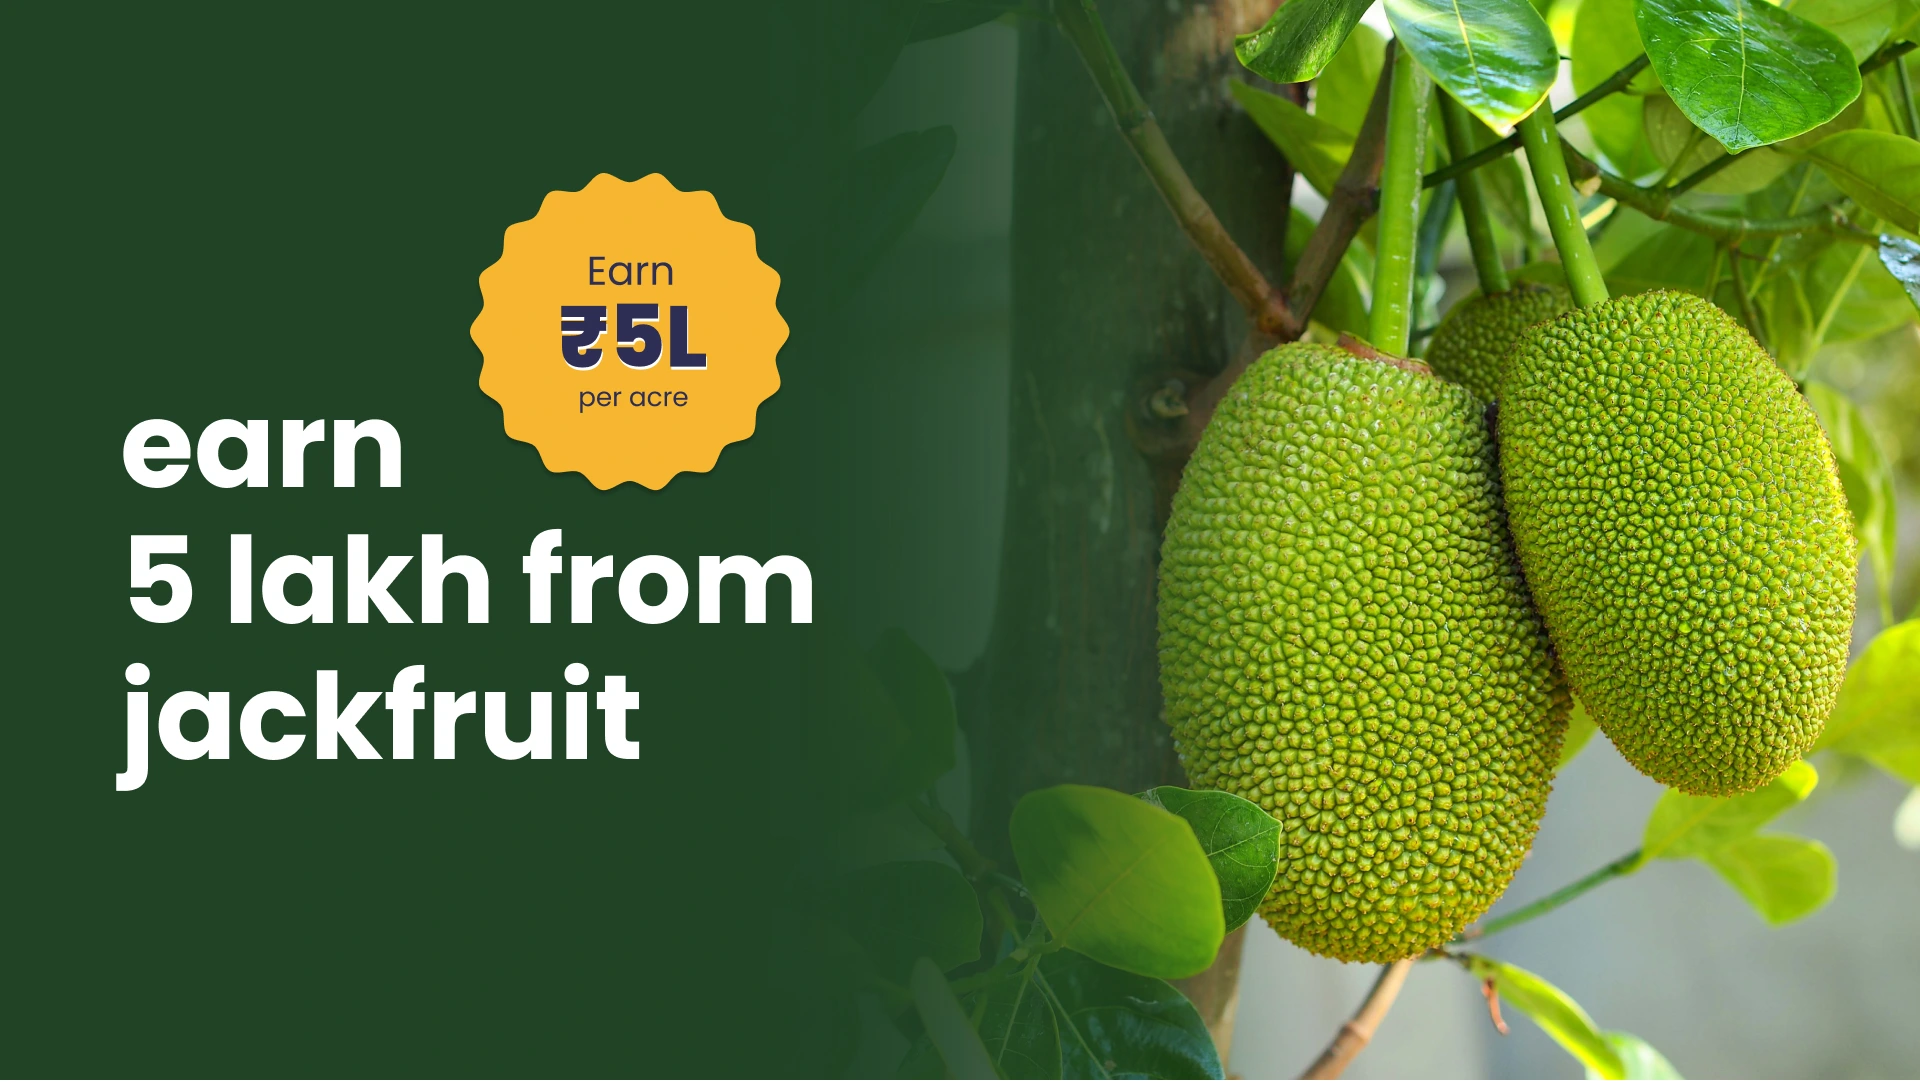 Course Trailer: Jackfruit Farming Course - Earn 5 lakh/acre. Watch to know more.